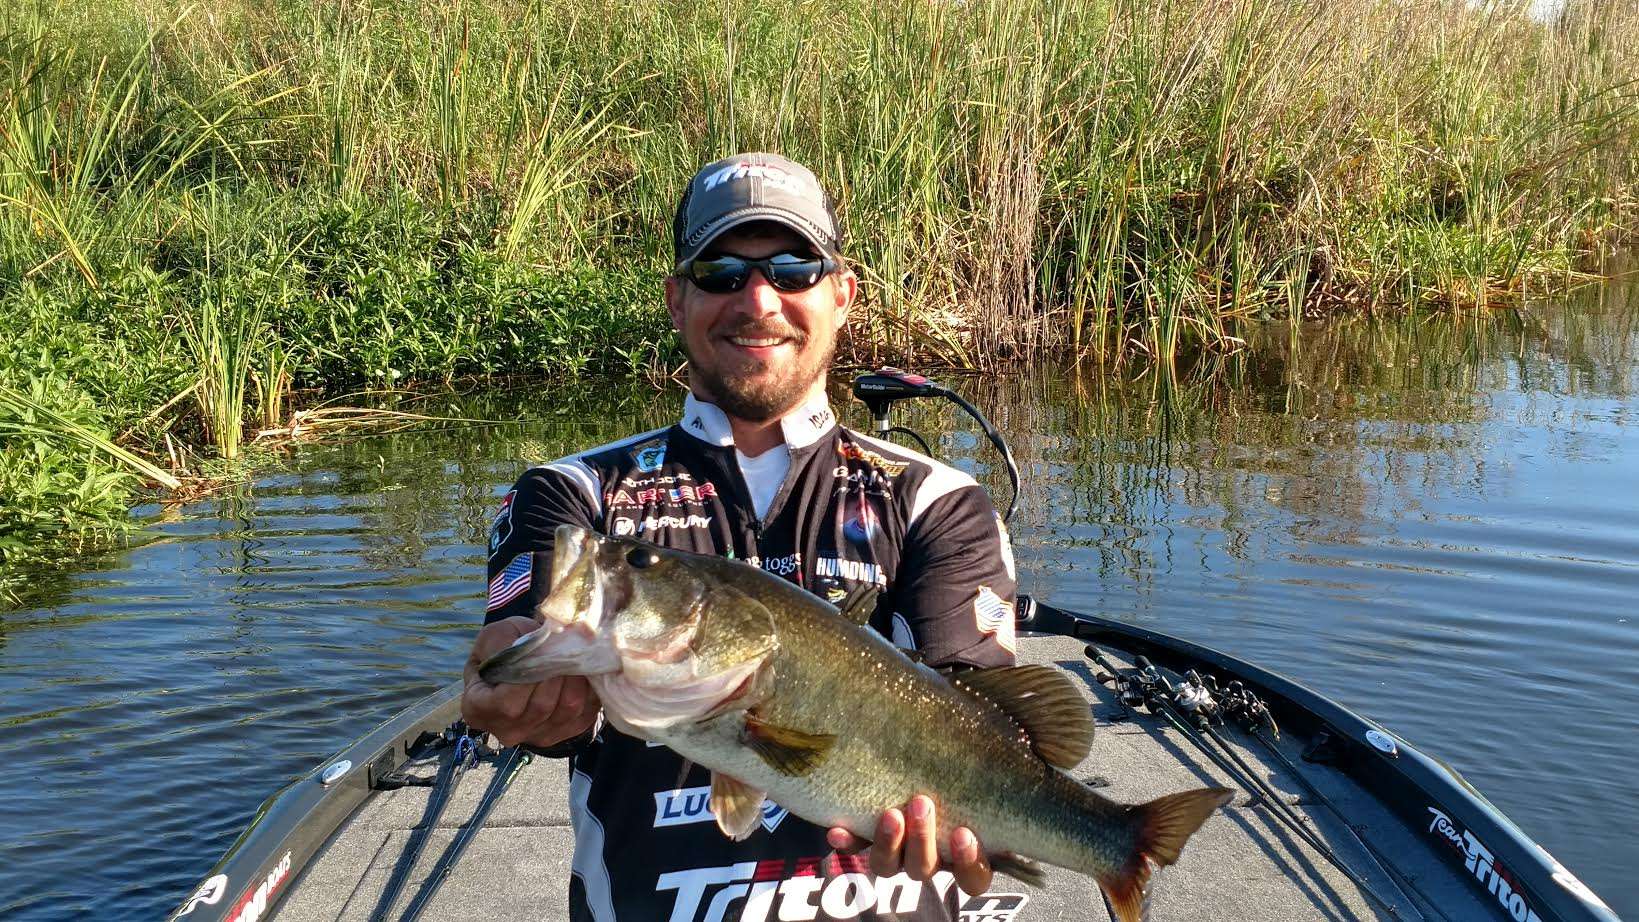 Nice hawg for Keith Poche. Keith is certainly fired up now!